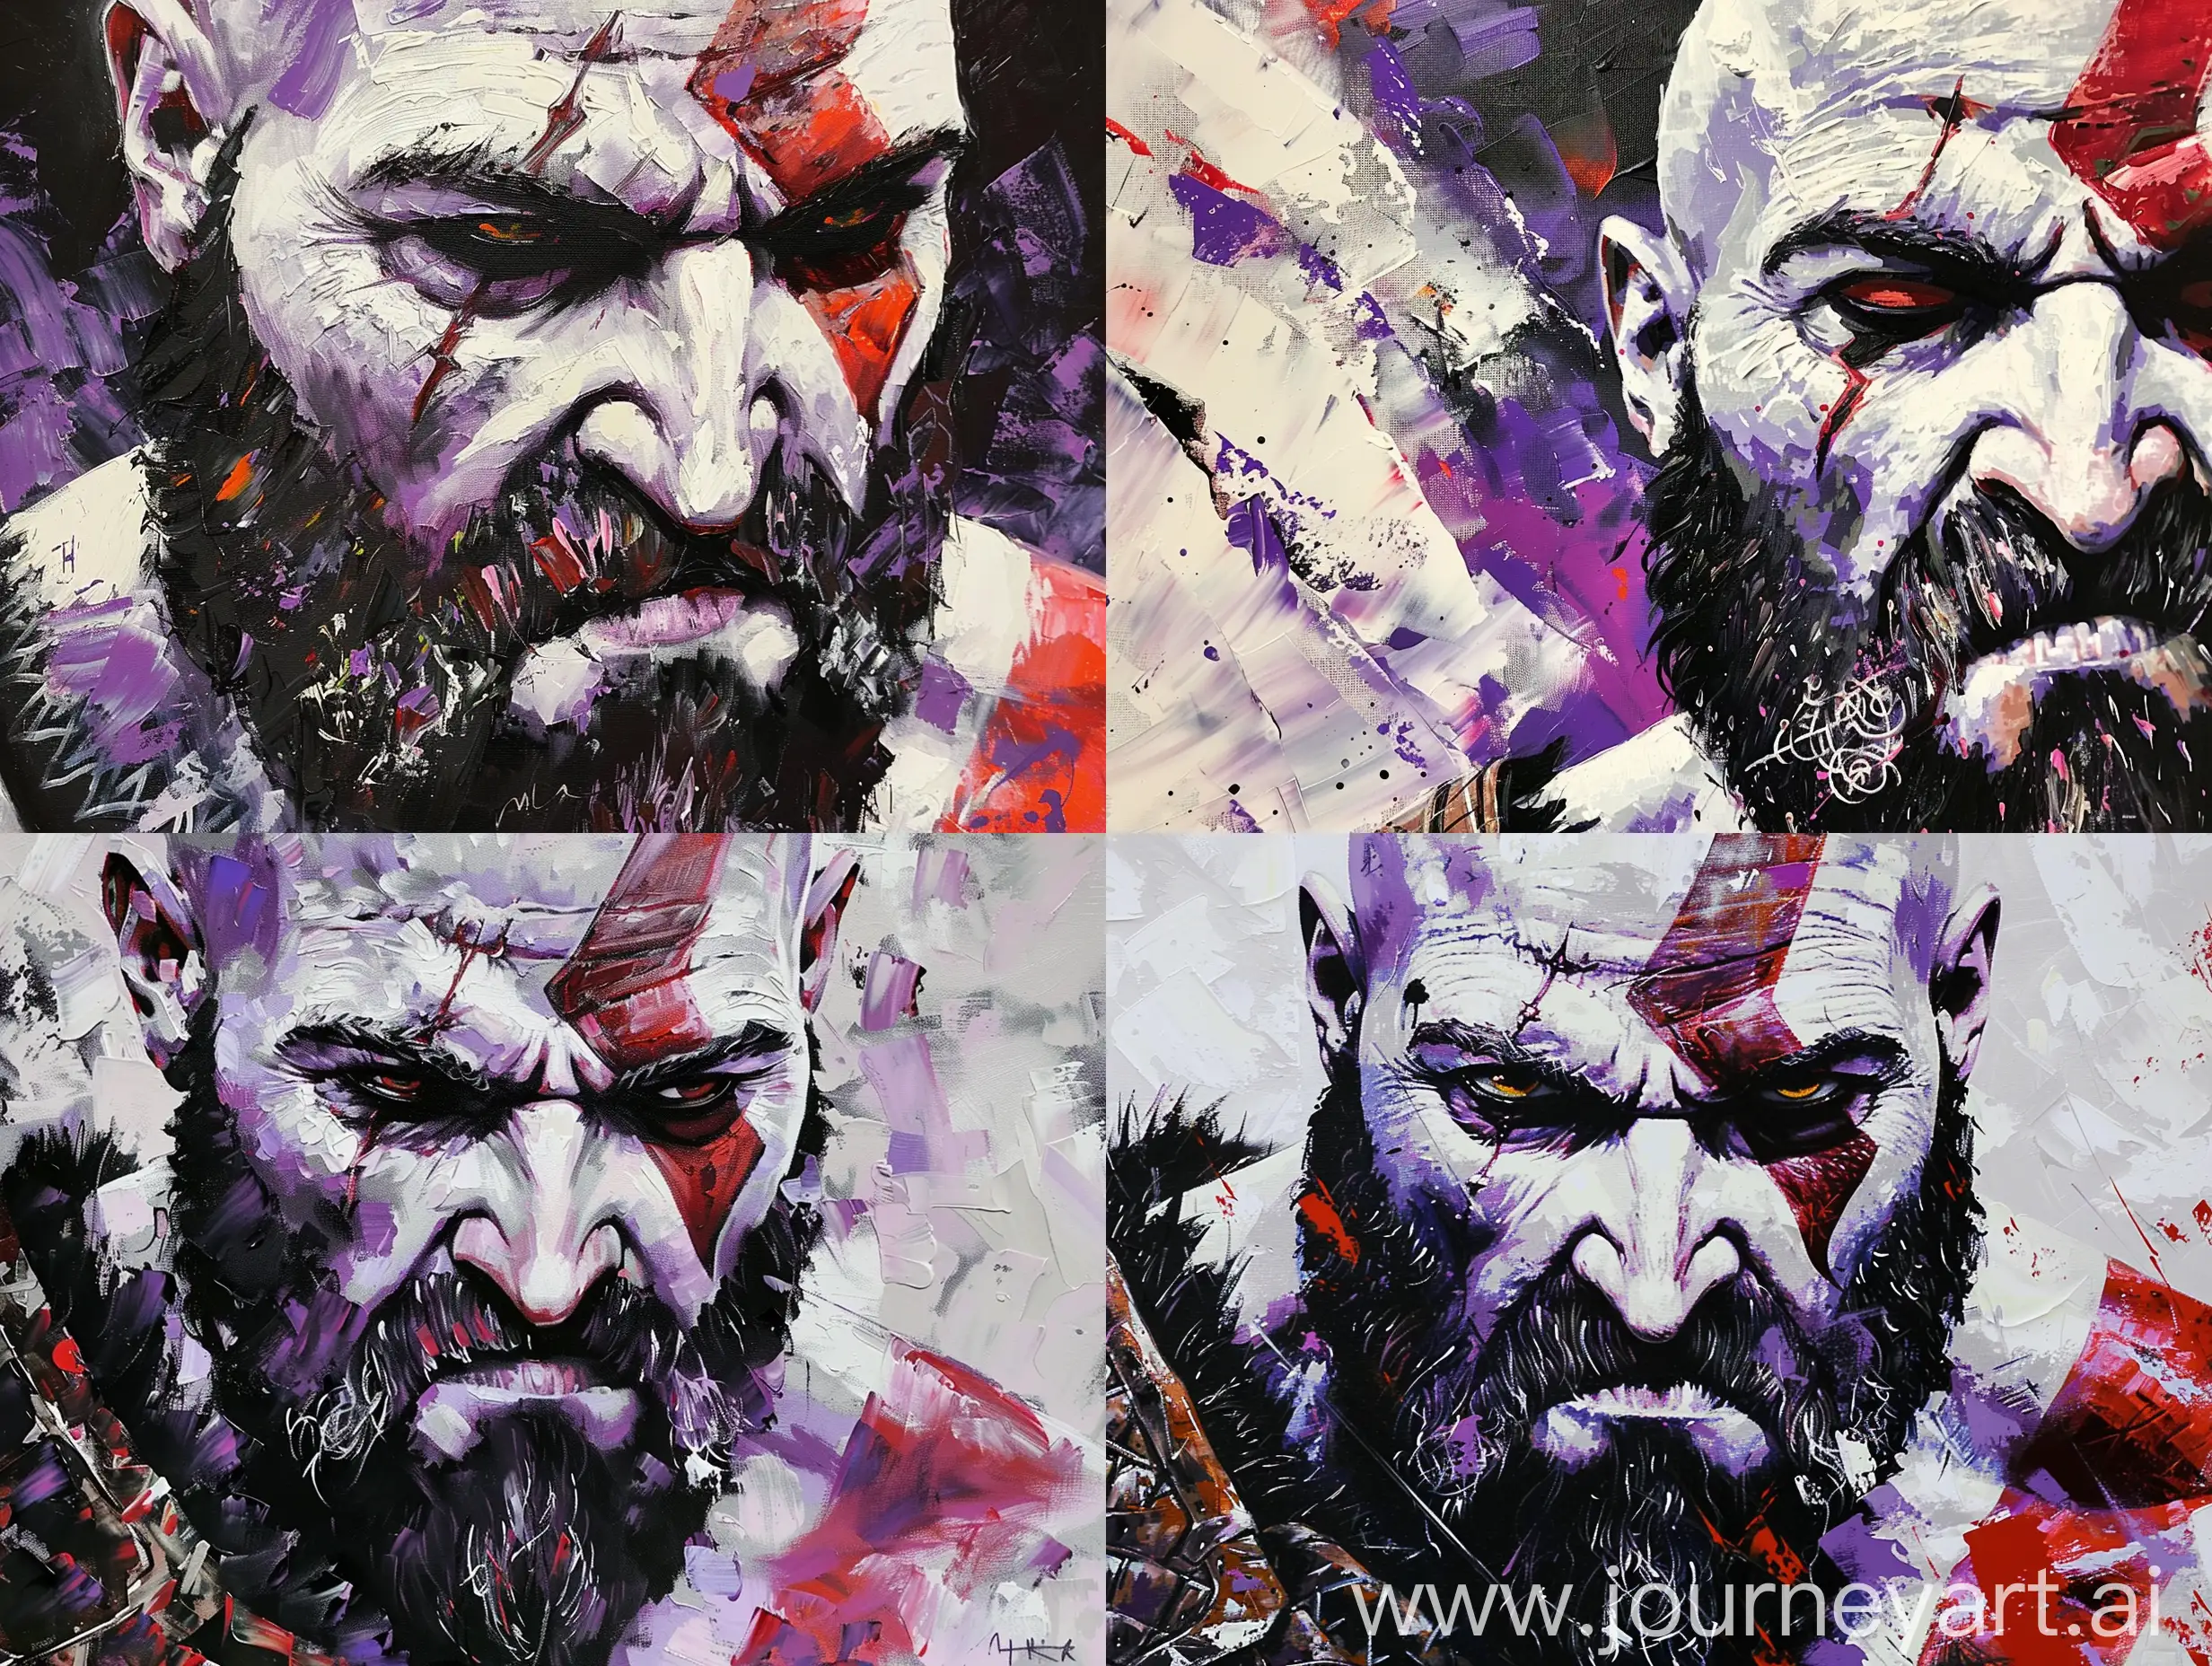 Epic-Fusion-Kratos-of-God-of-War-Meets-Star-Wars-in-Vibrant-Pastel-Palette